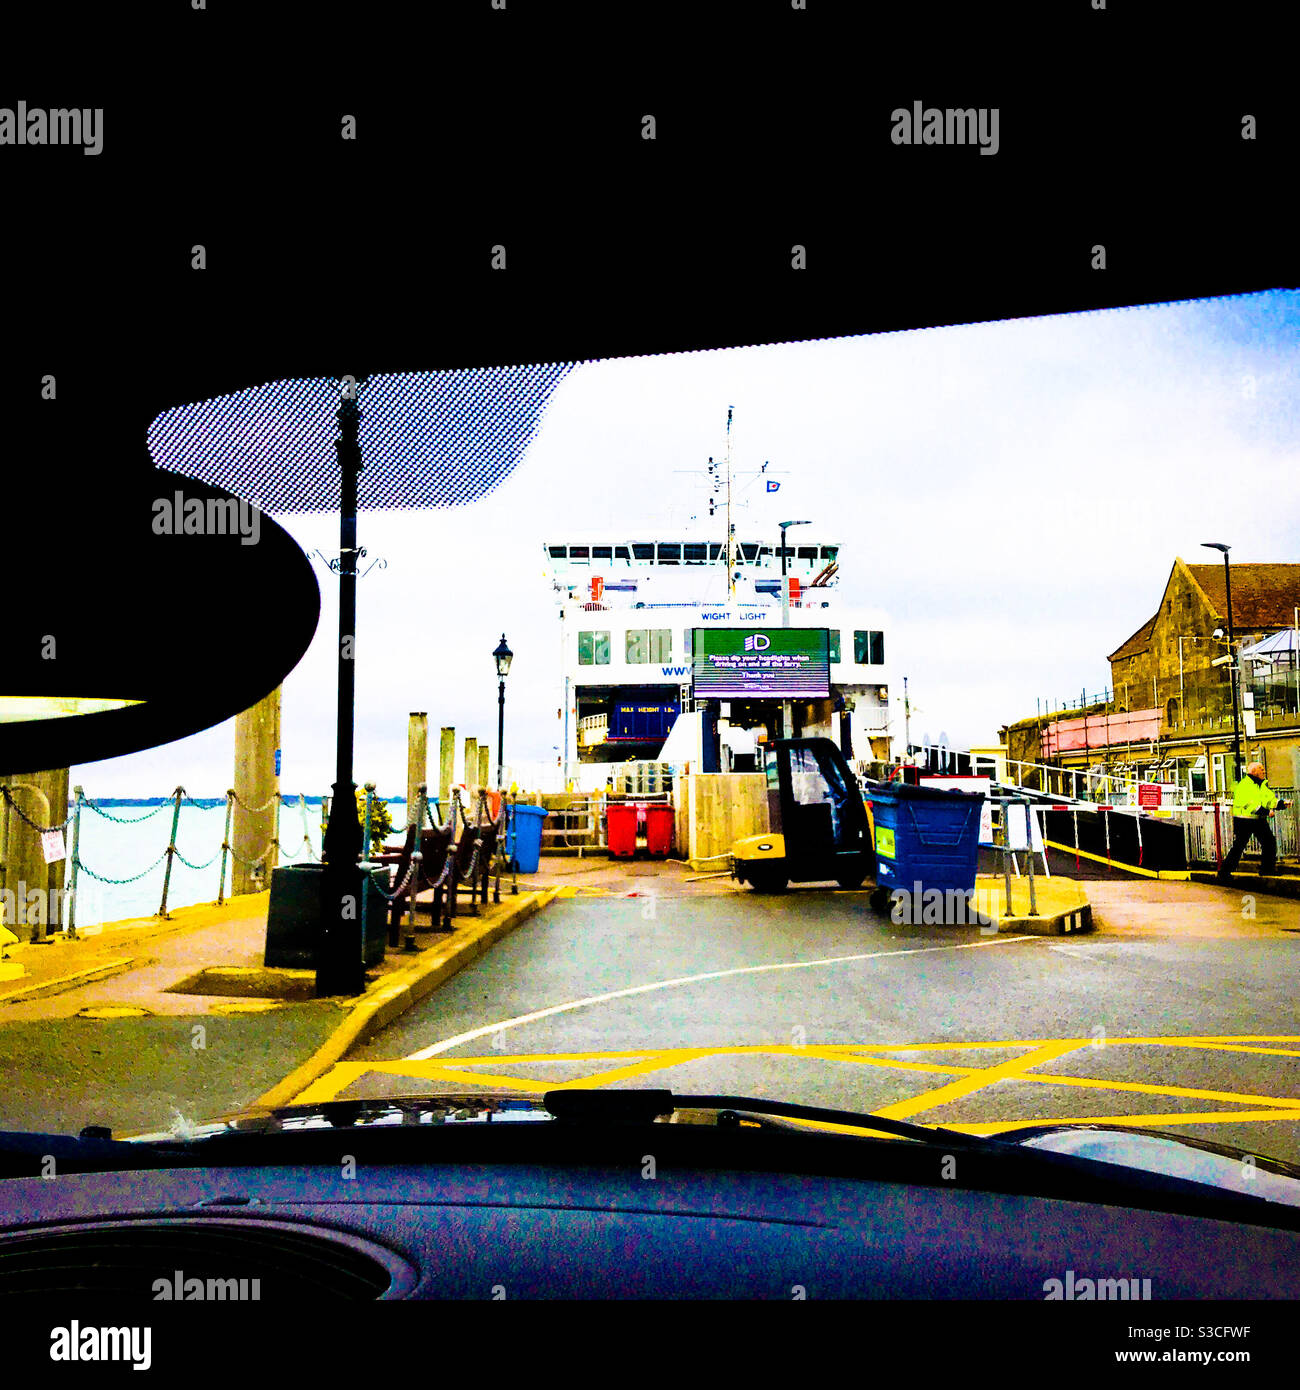 Yarmouth Isle of Wight Wightlink Ferry terminal Solent crossing view from waiting passenger car vehicle window in boarding queue Stock Photo